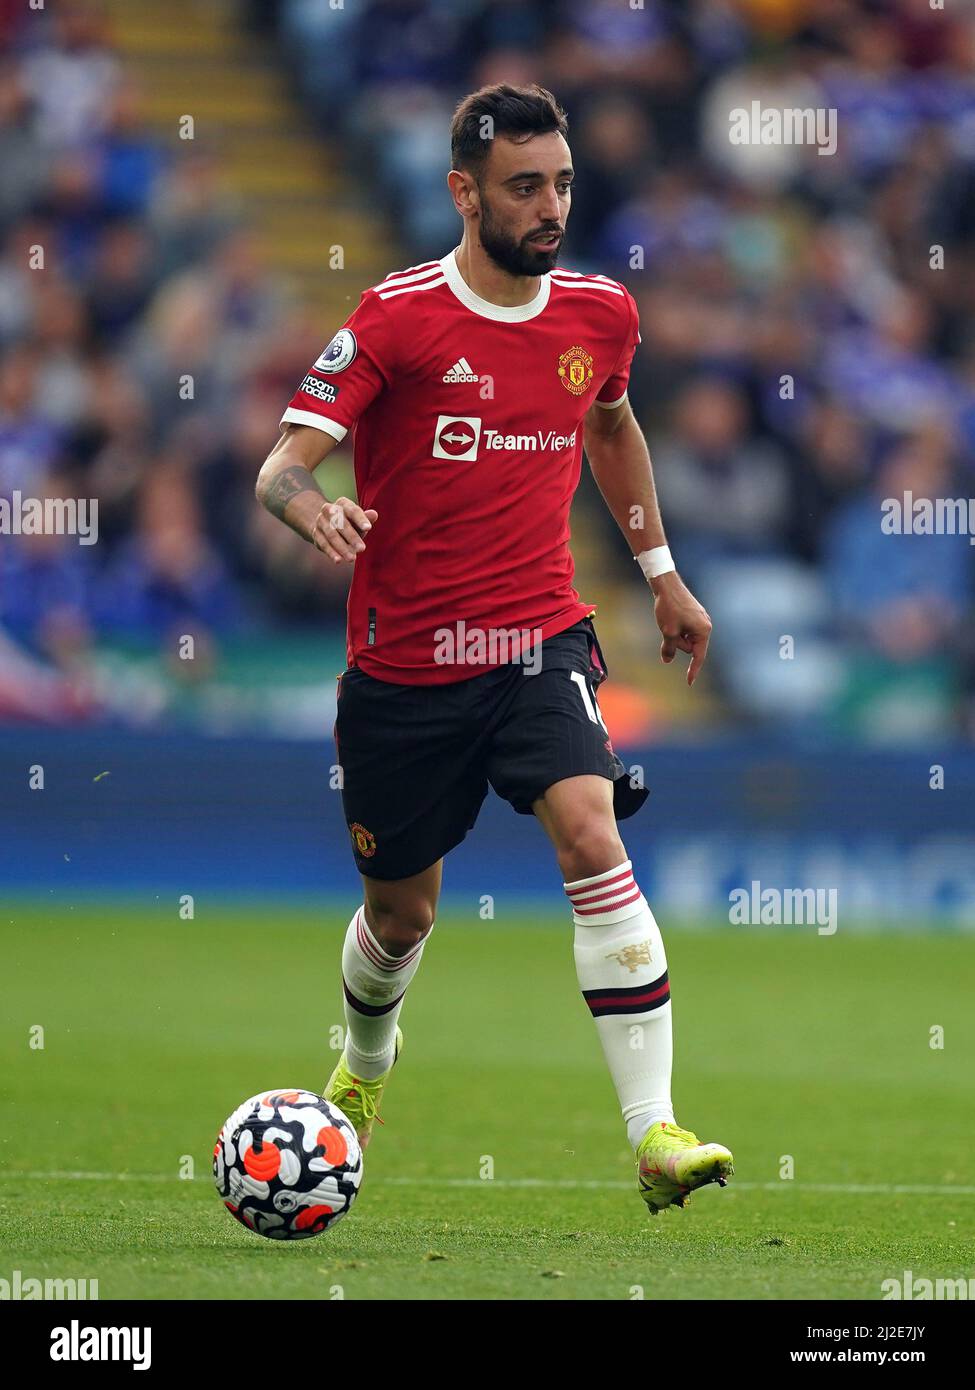 File photo dated 16-10-2021 of Manchester United's Bruno Fernandes who has signed a new contract to extend his stay at Manchester United until the summer of 2026 with the option for a further year. Issue date: Friday April 1, 2022. Stock Photo